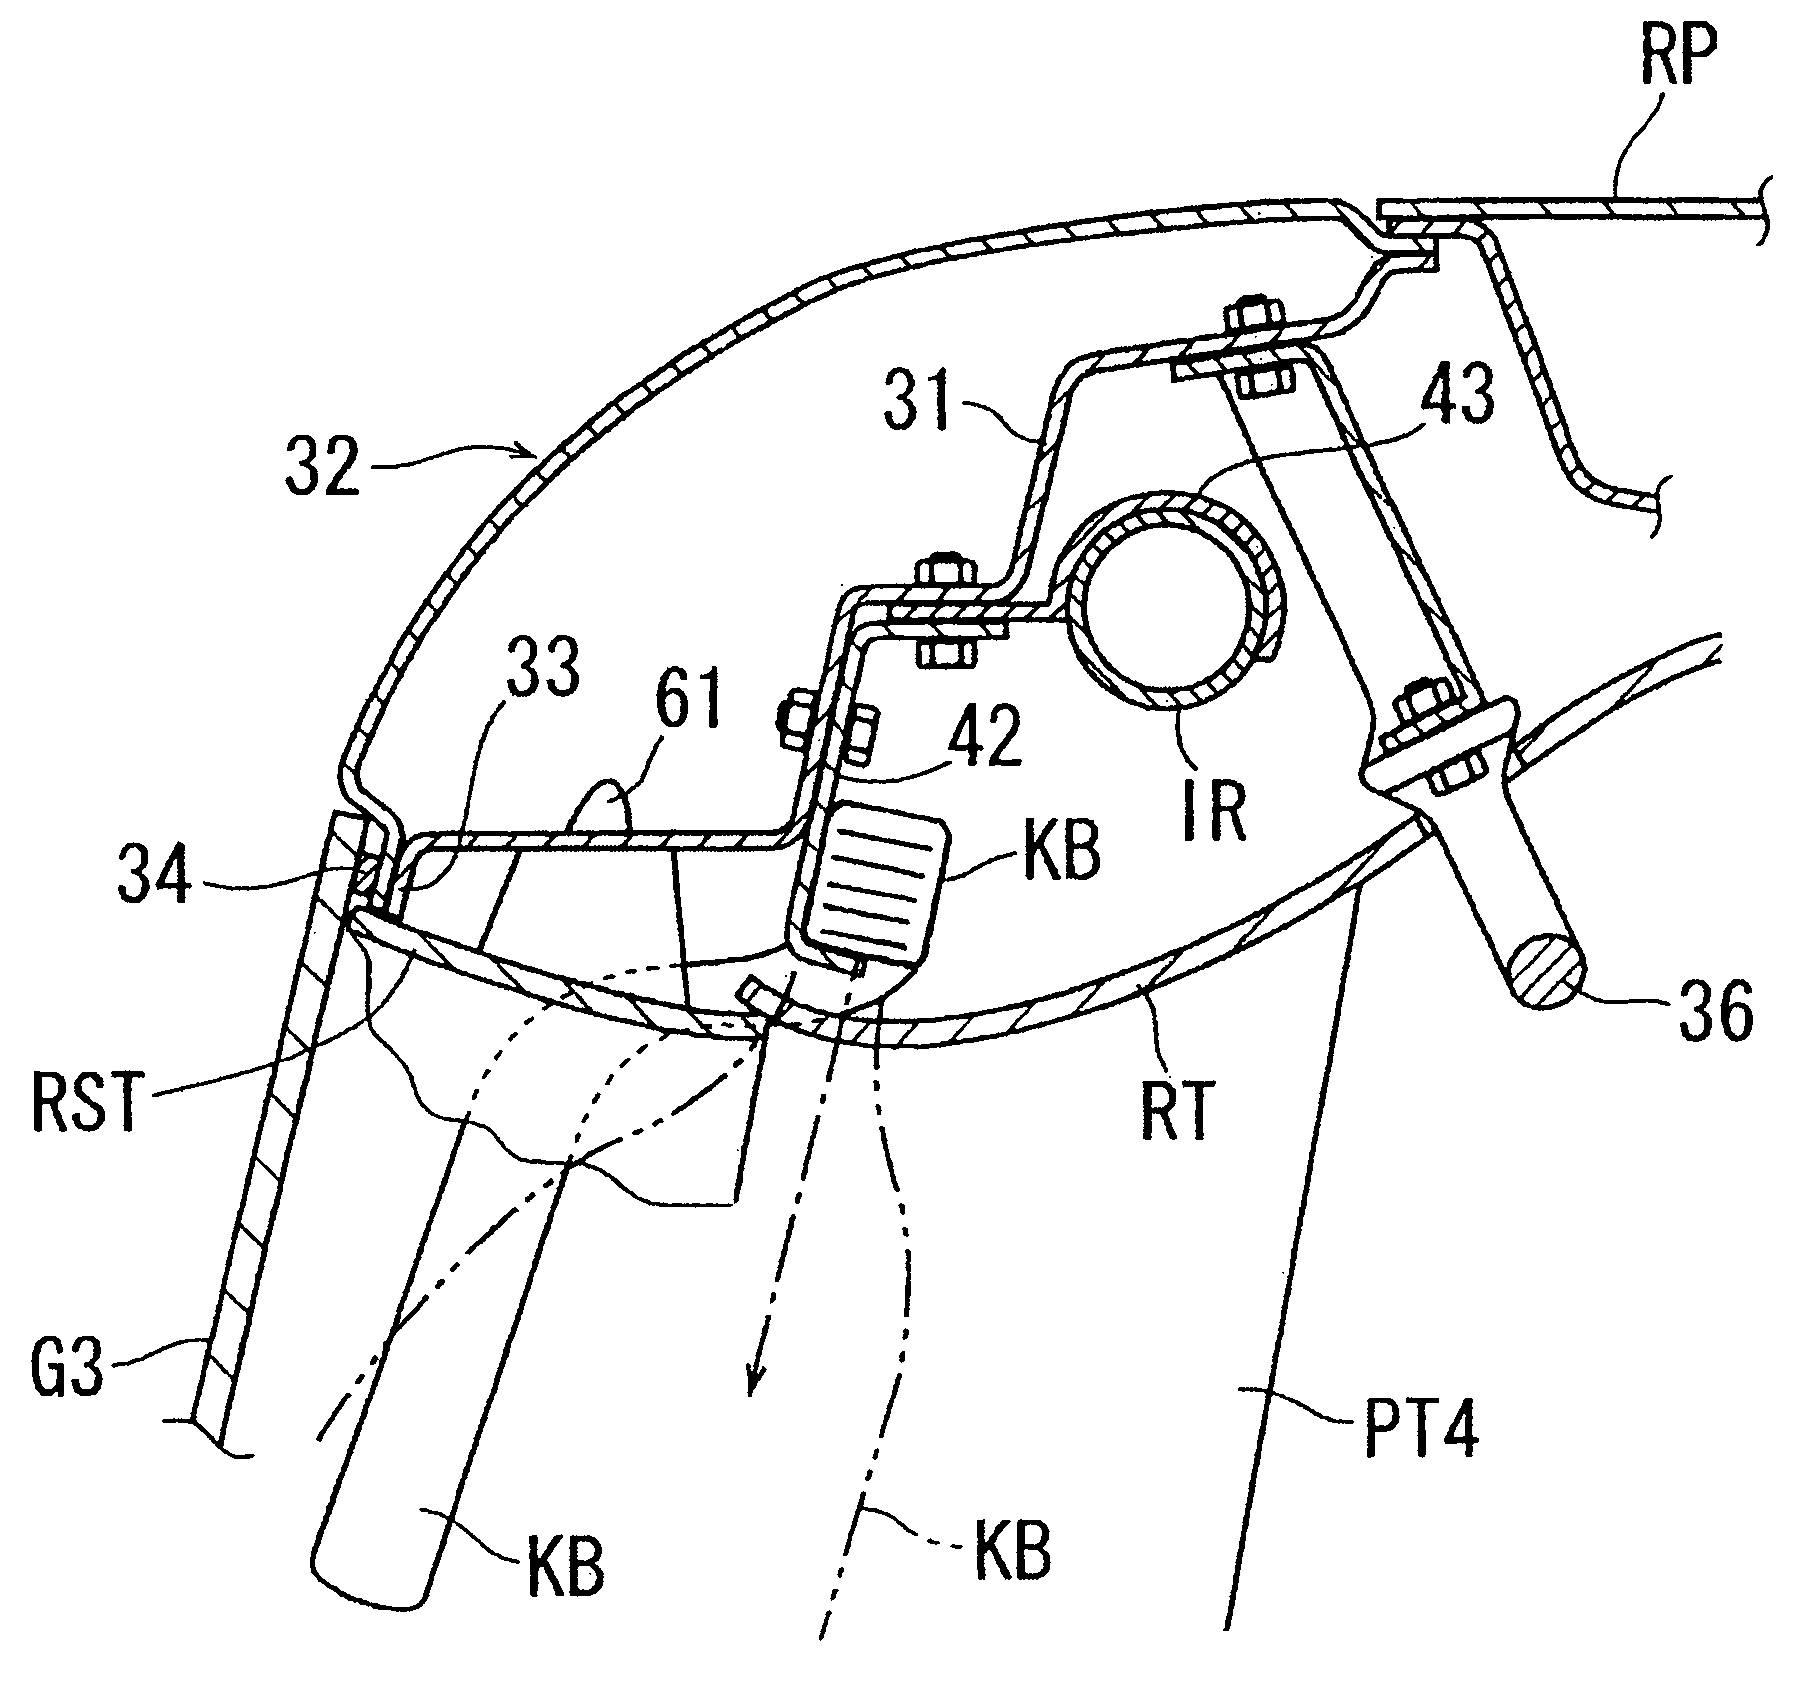 Rear structure of vehicle provided with curtain air bag apparatus